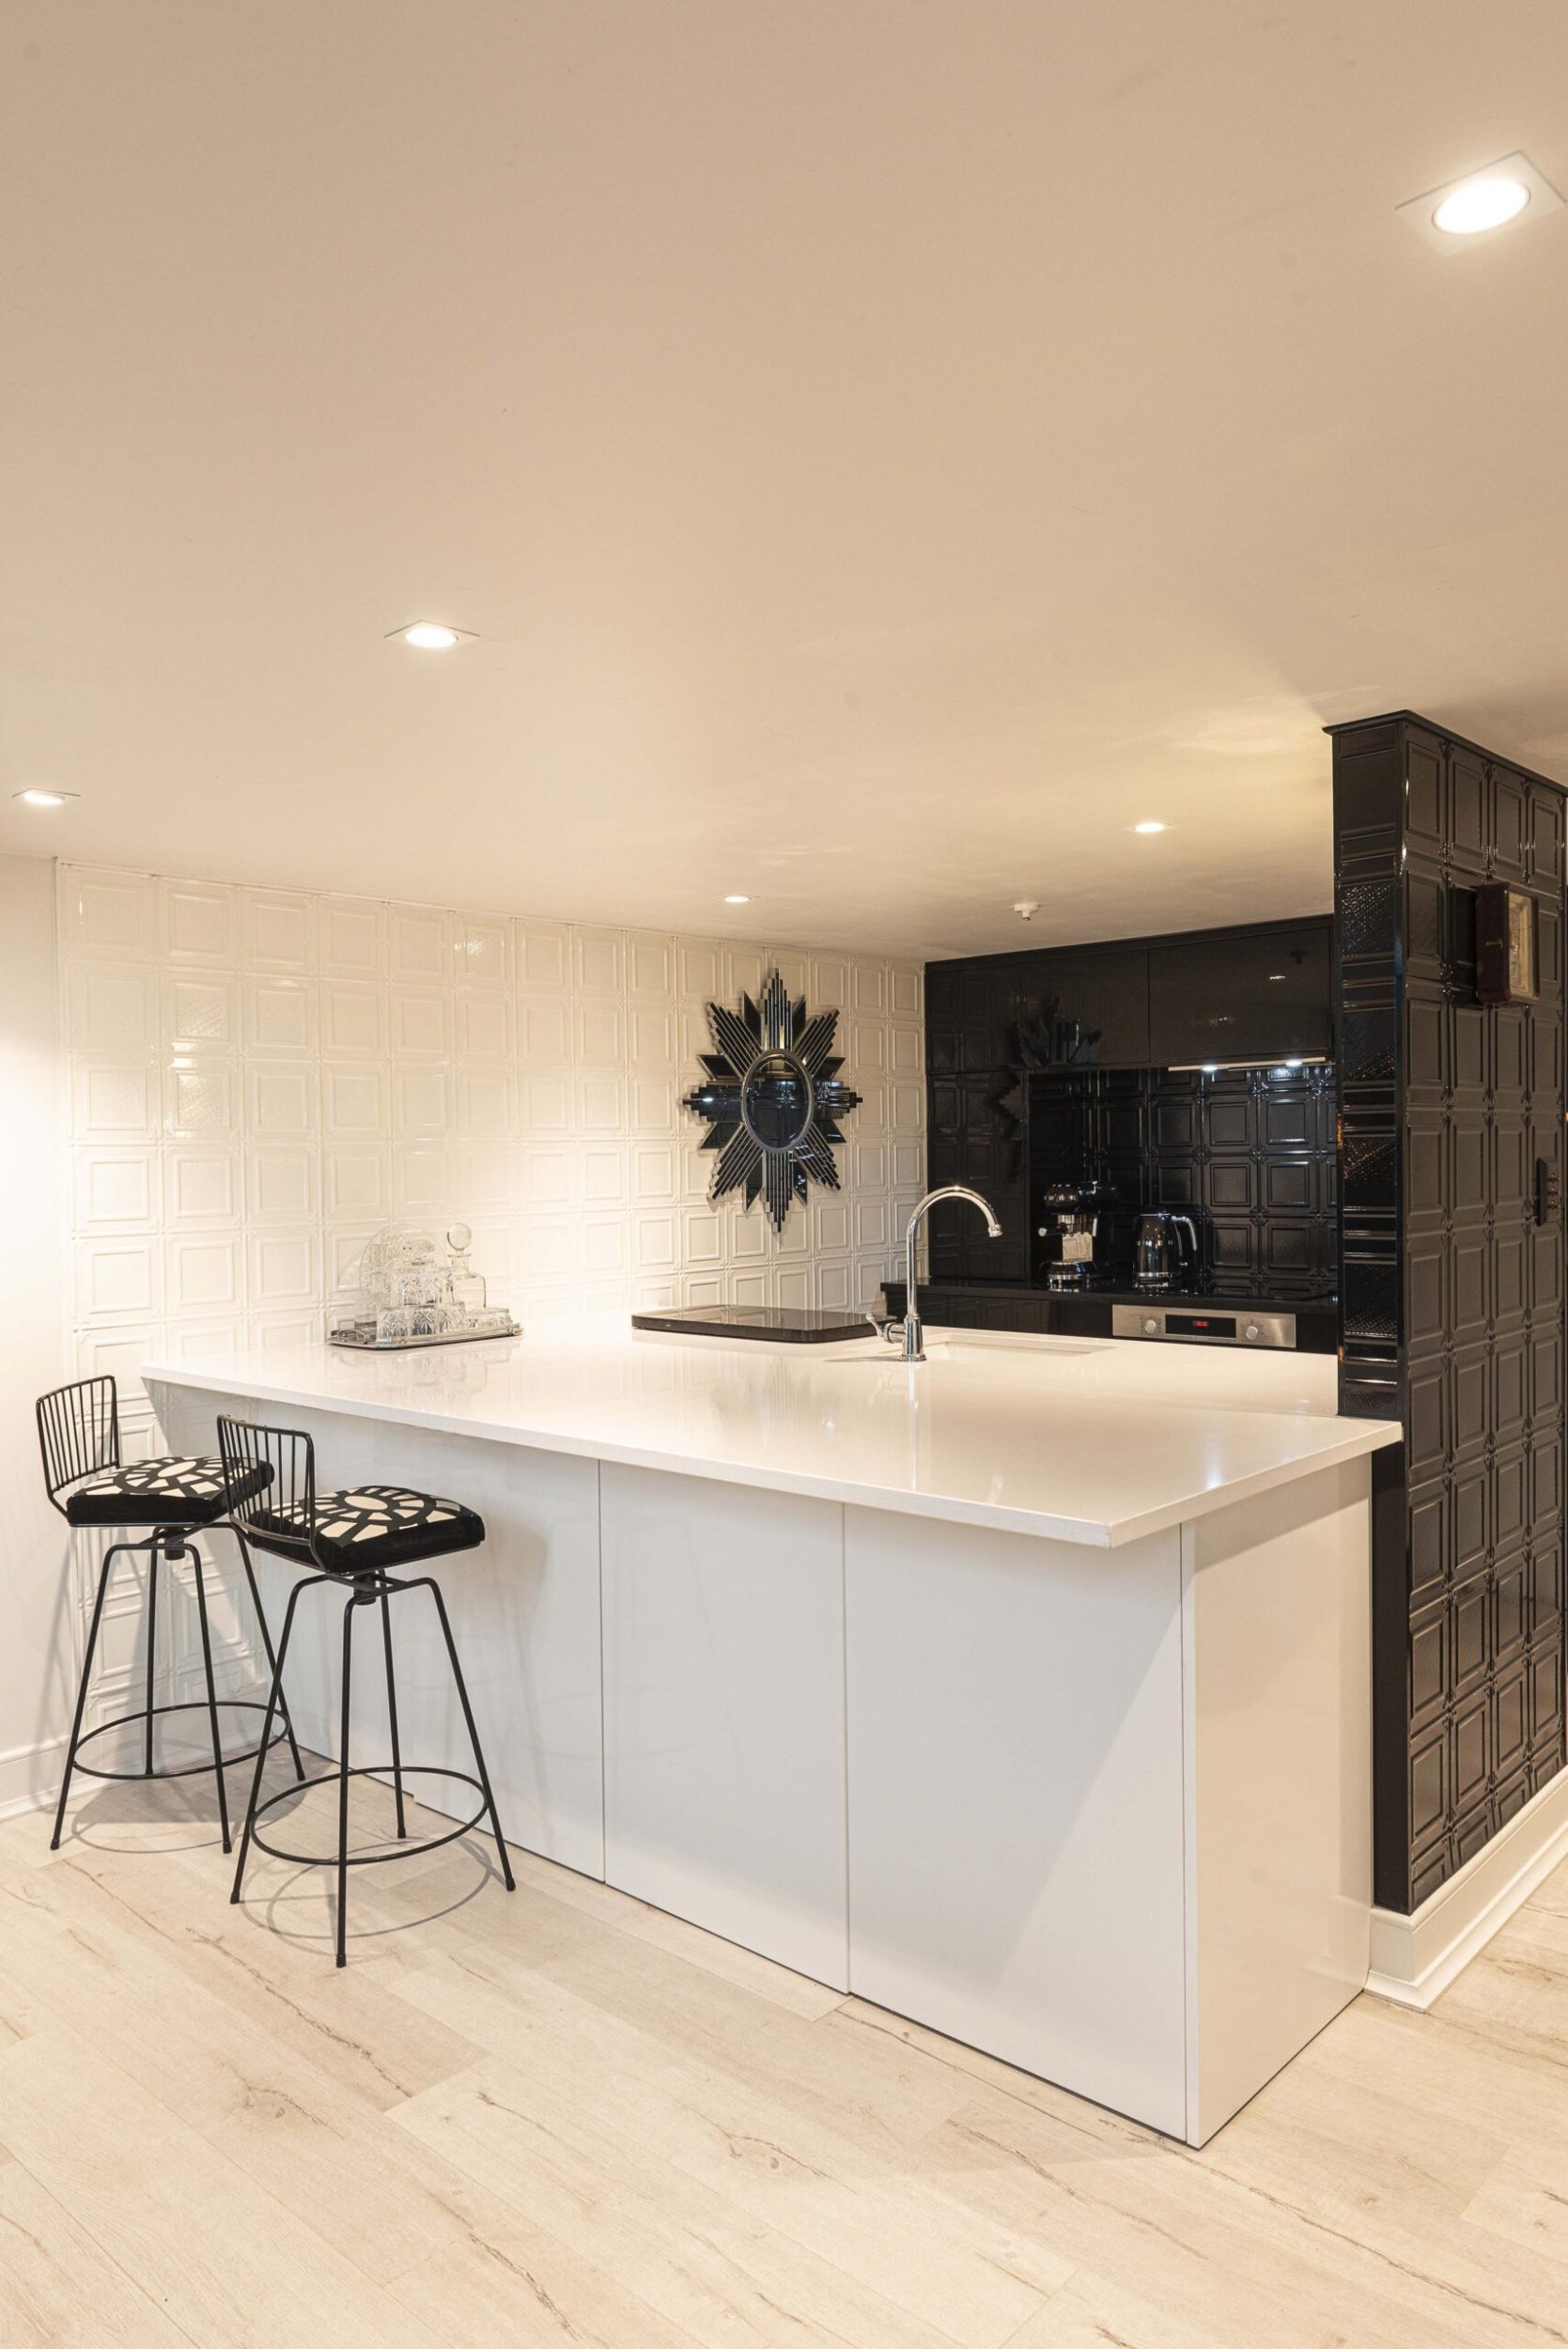 Kitchen with white pressed tin walls and black cabinetry